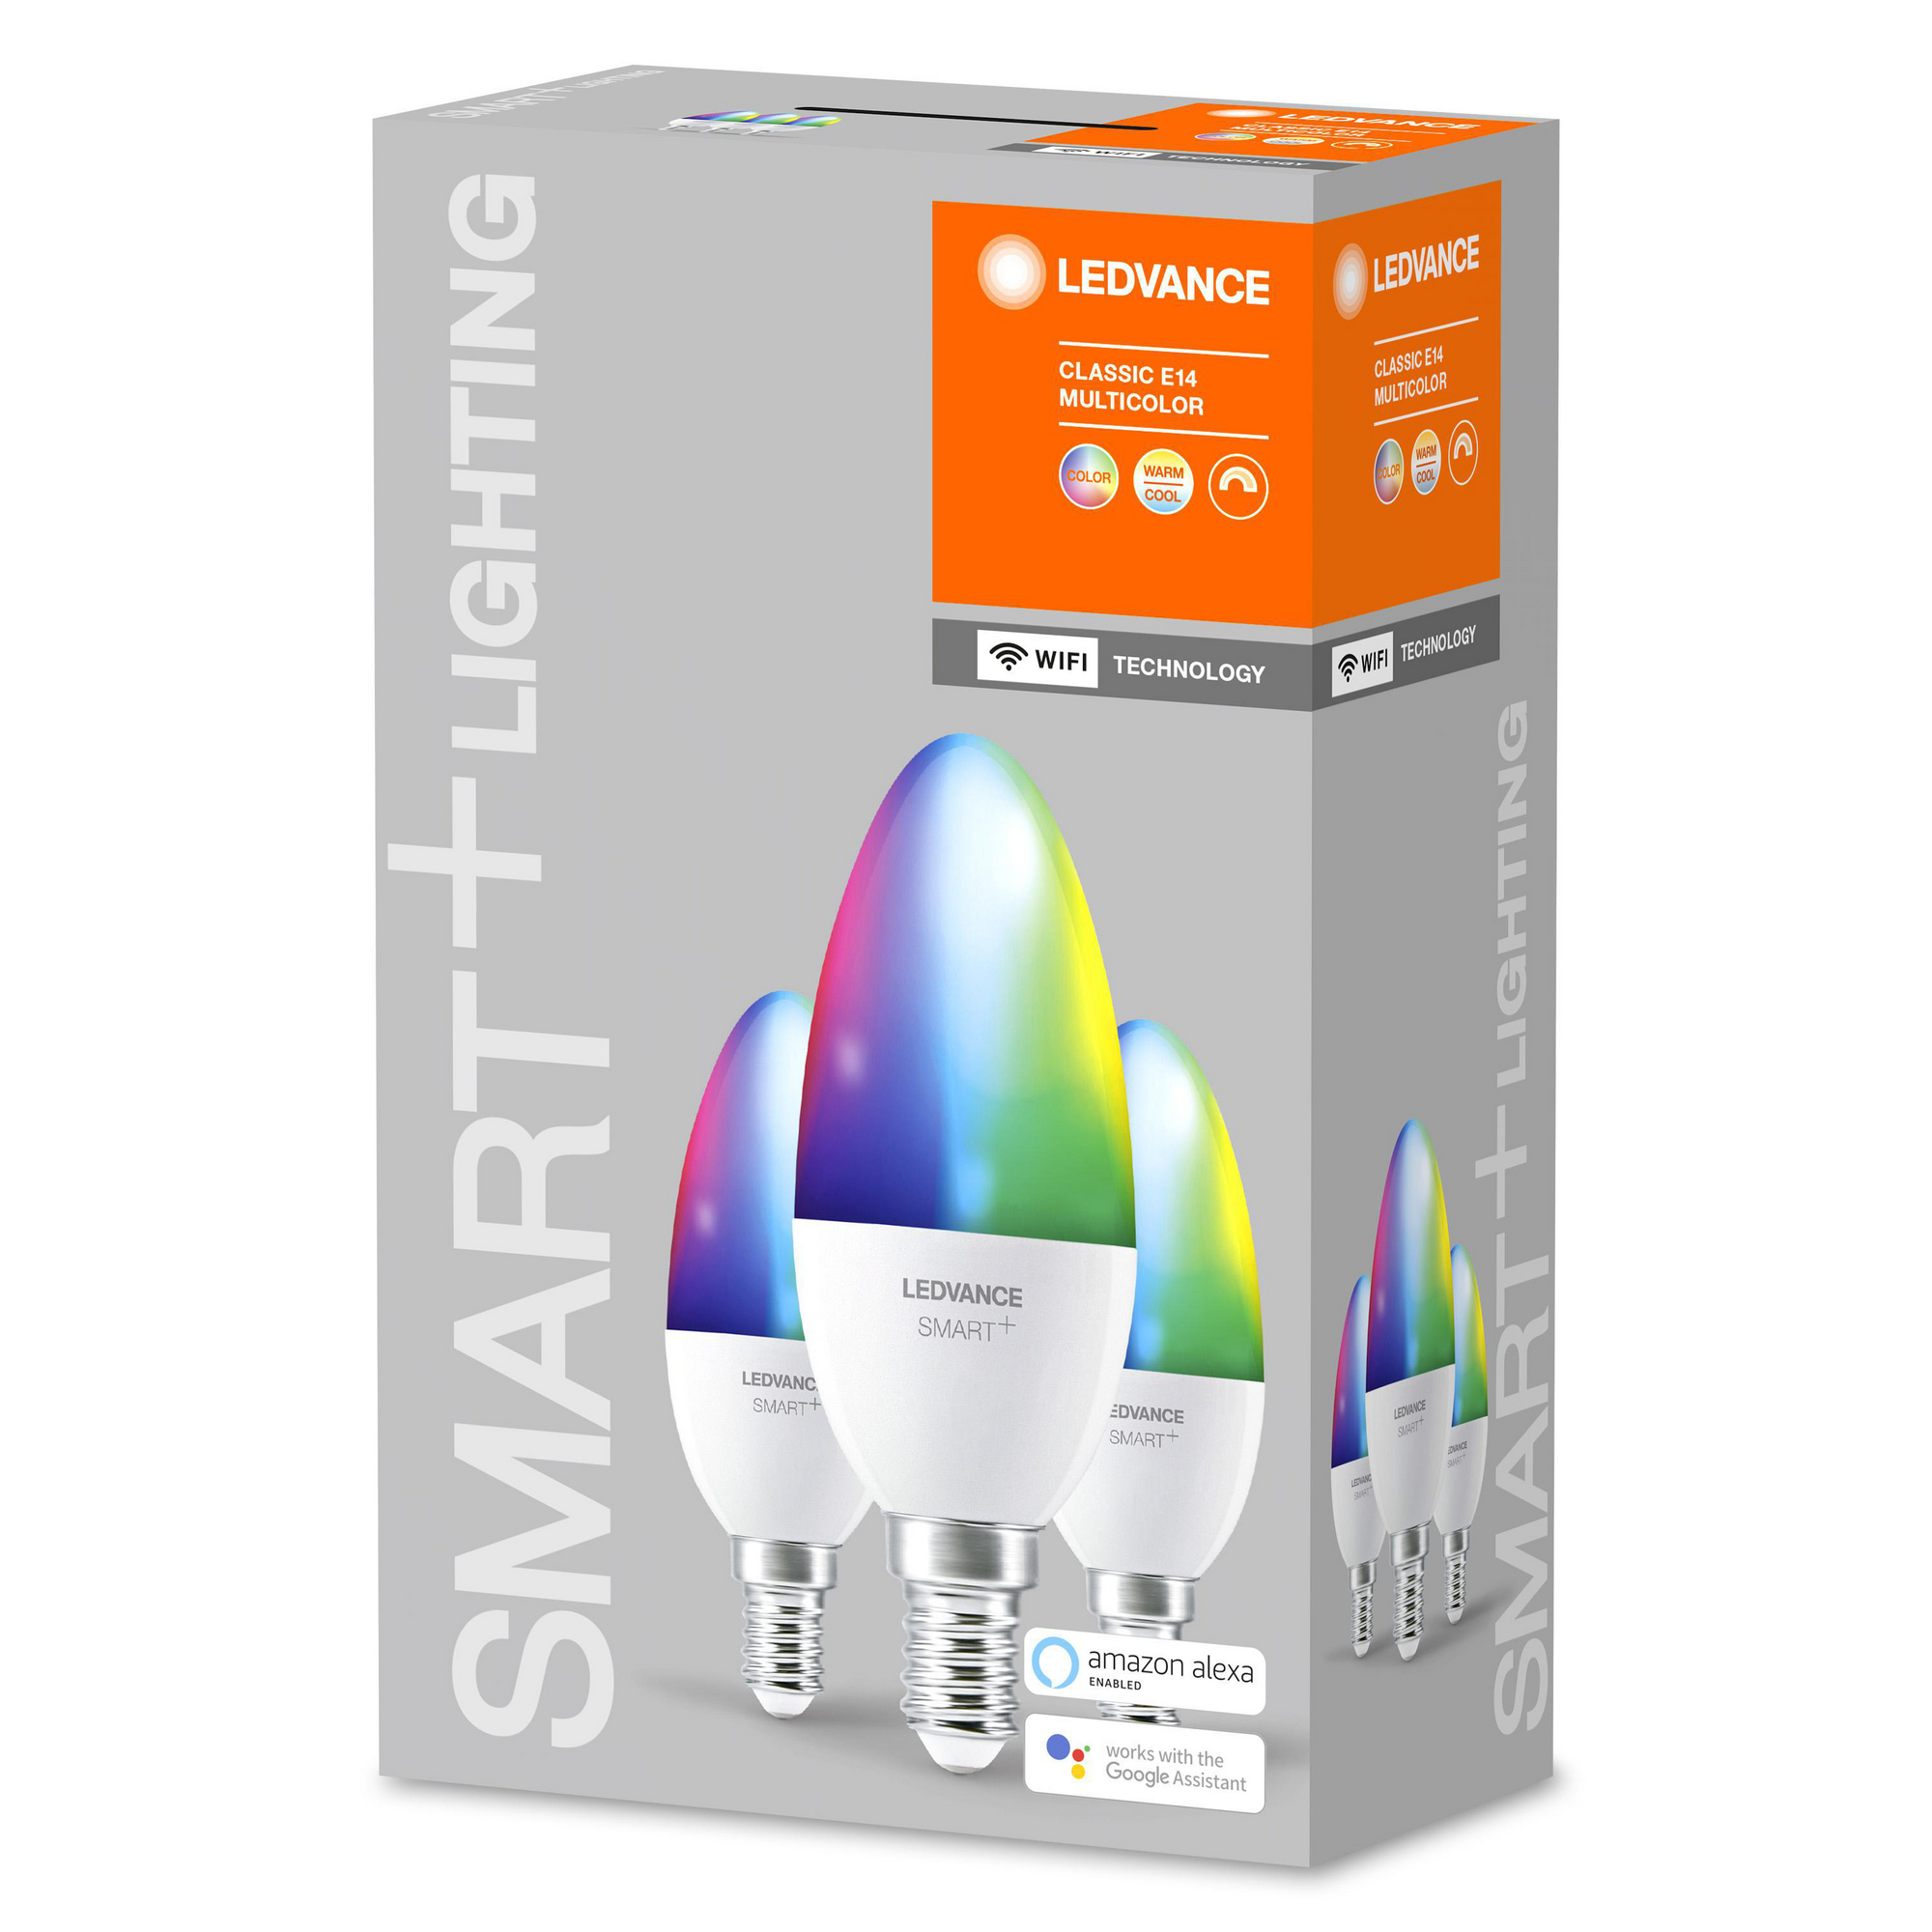 LED-Lampe 'Smart+' 10,7 cm 470 lm 5 W E14 weiß WLAN Tunable White 3 Stk. + product picture